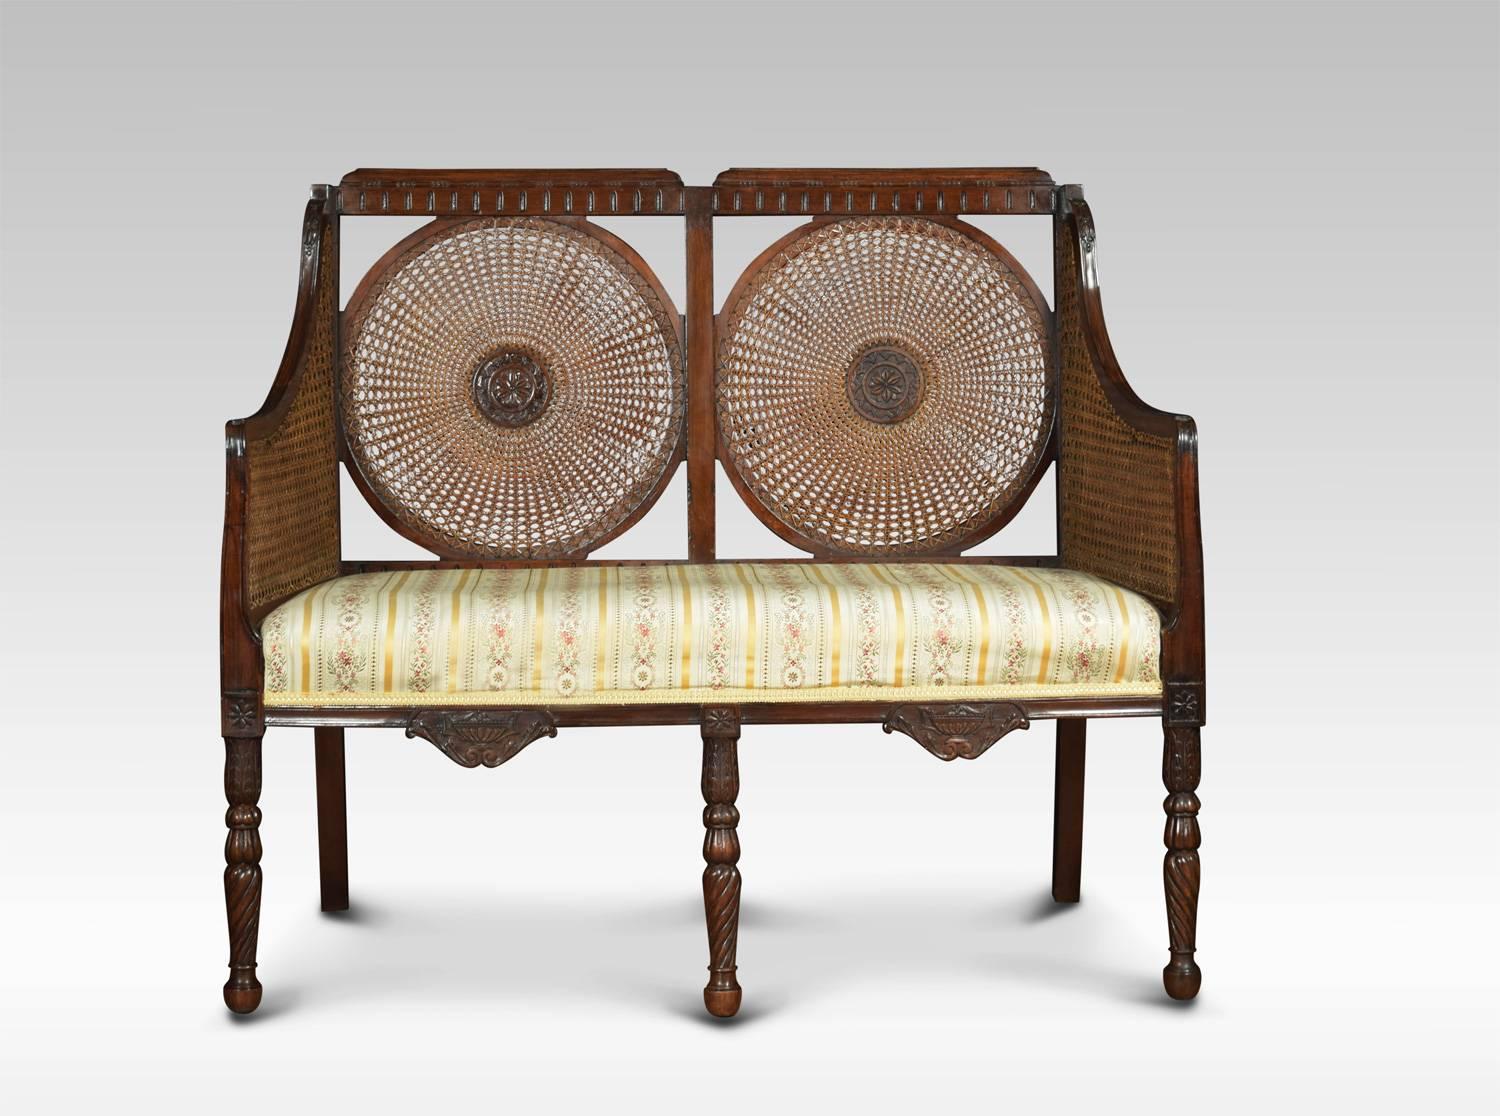 Two-seat bergere settee, the solid mahogany frame, with inset with double circular panelled cane work back and upholstered seat. Raised up on finely carved fluted front legs
Dimensions
Height 37 inches height to seat 18 inches
Width 43